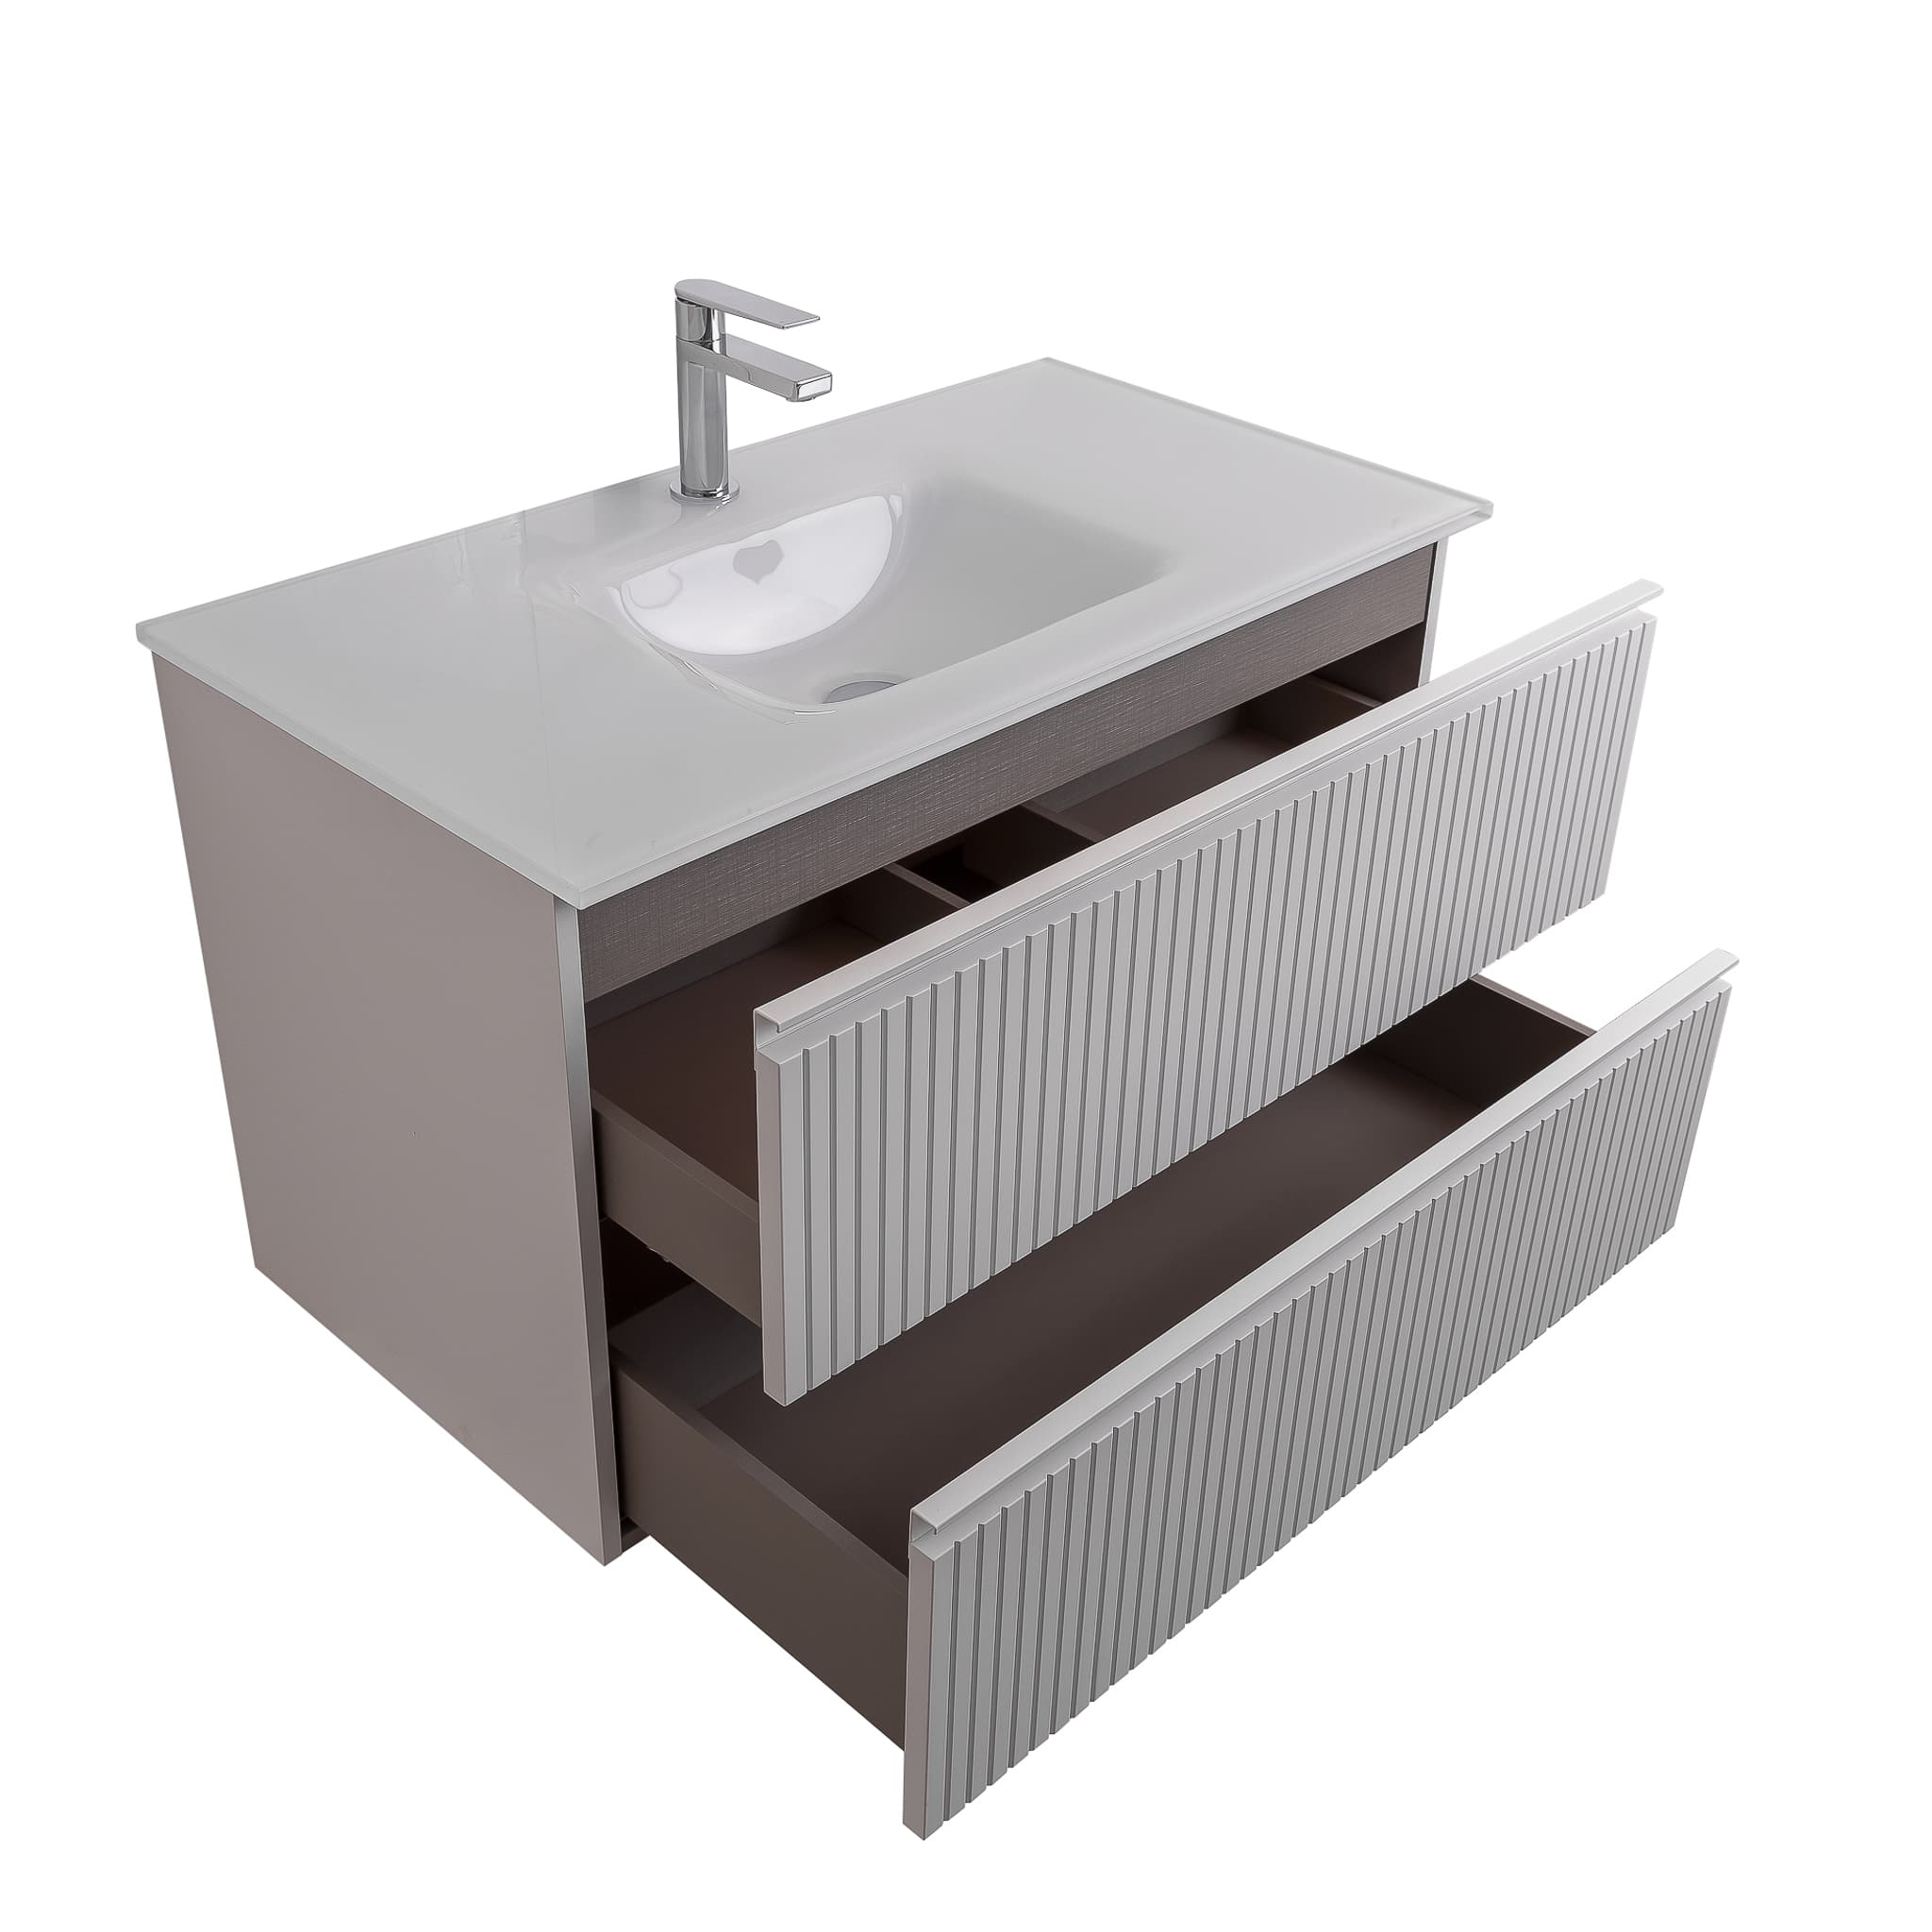 Ares 31.5 Matte White Cabinet, White Tempered Glass Sink, Wall Mounted Modern Vanity Set